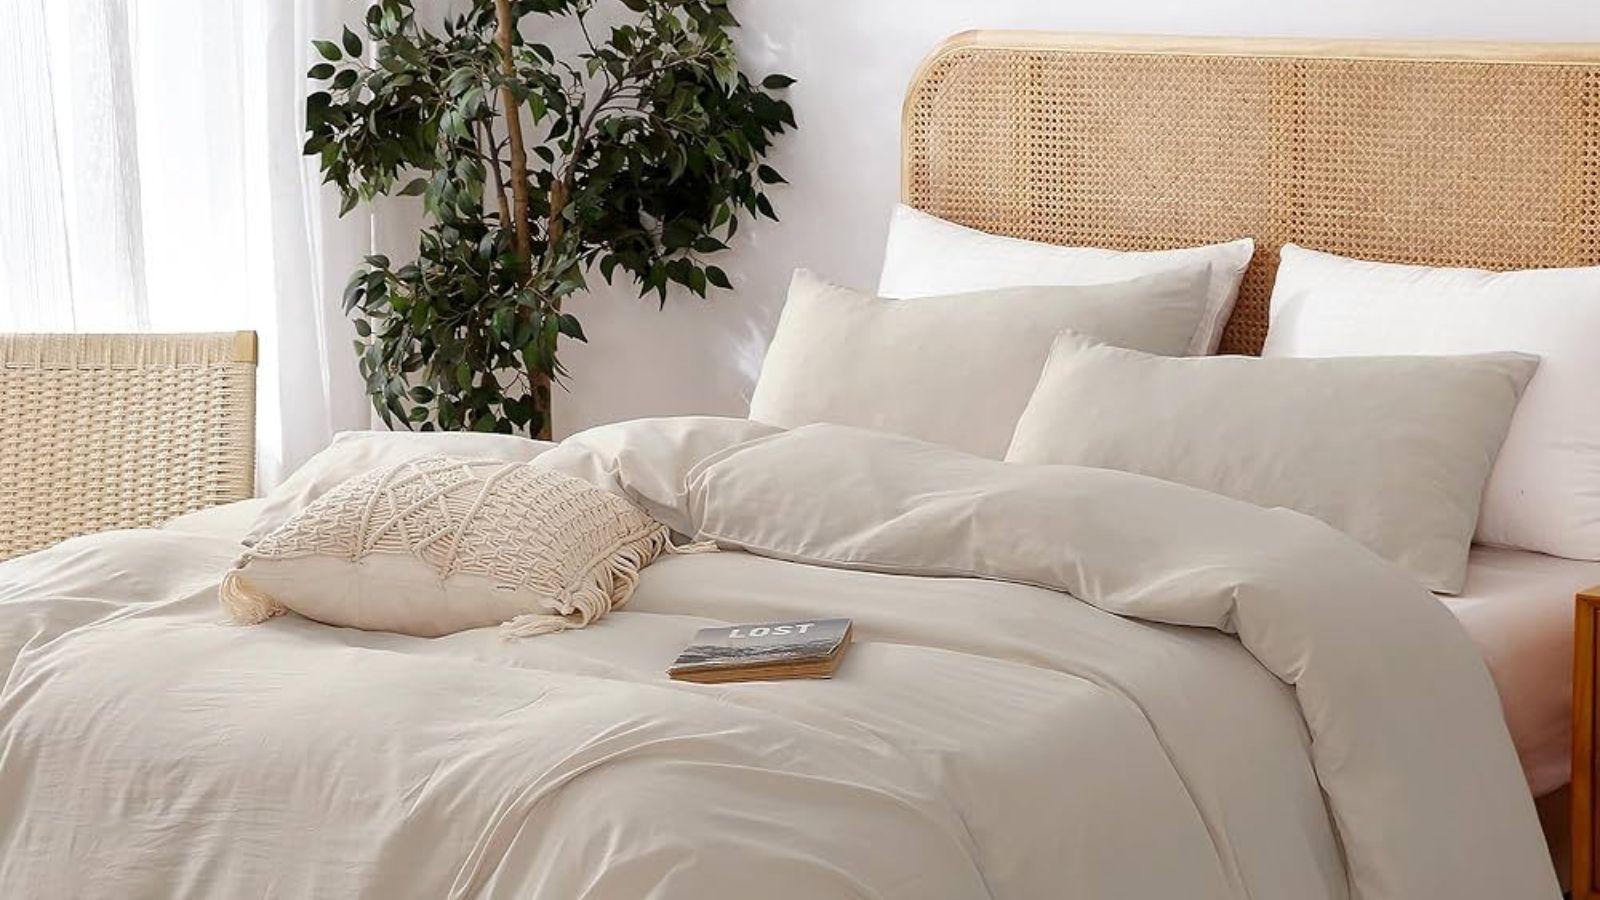 I'm a sales hunter: this is where to buy affordable bedding